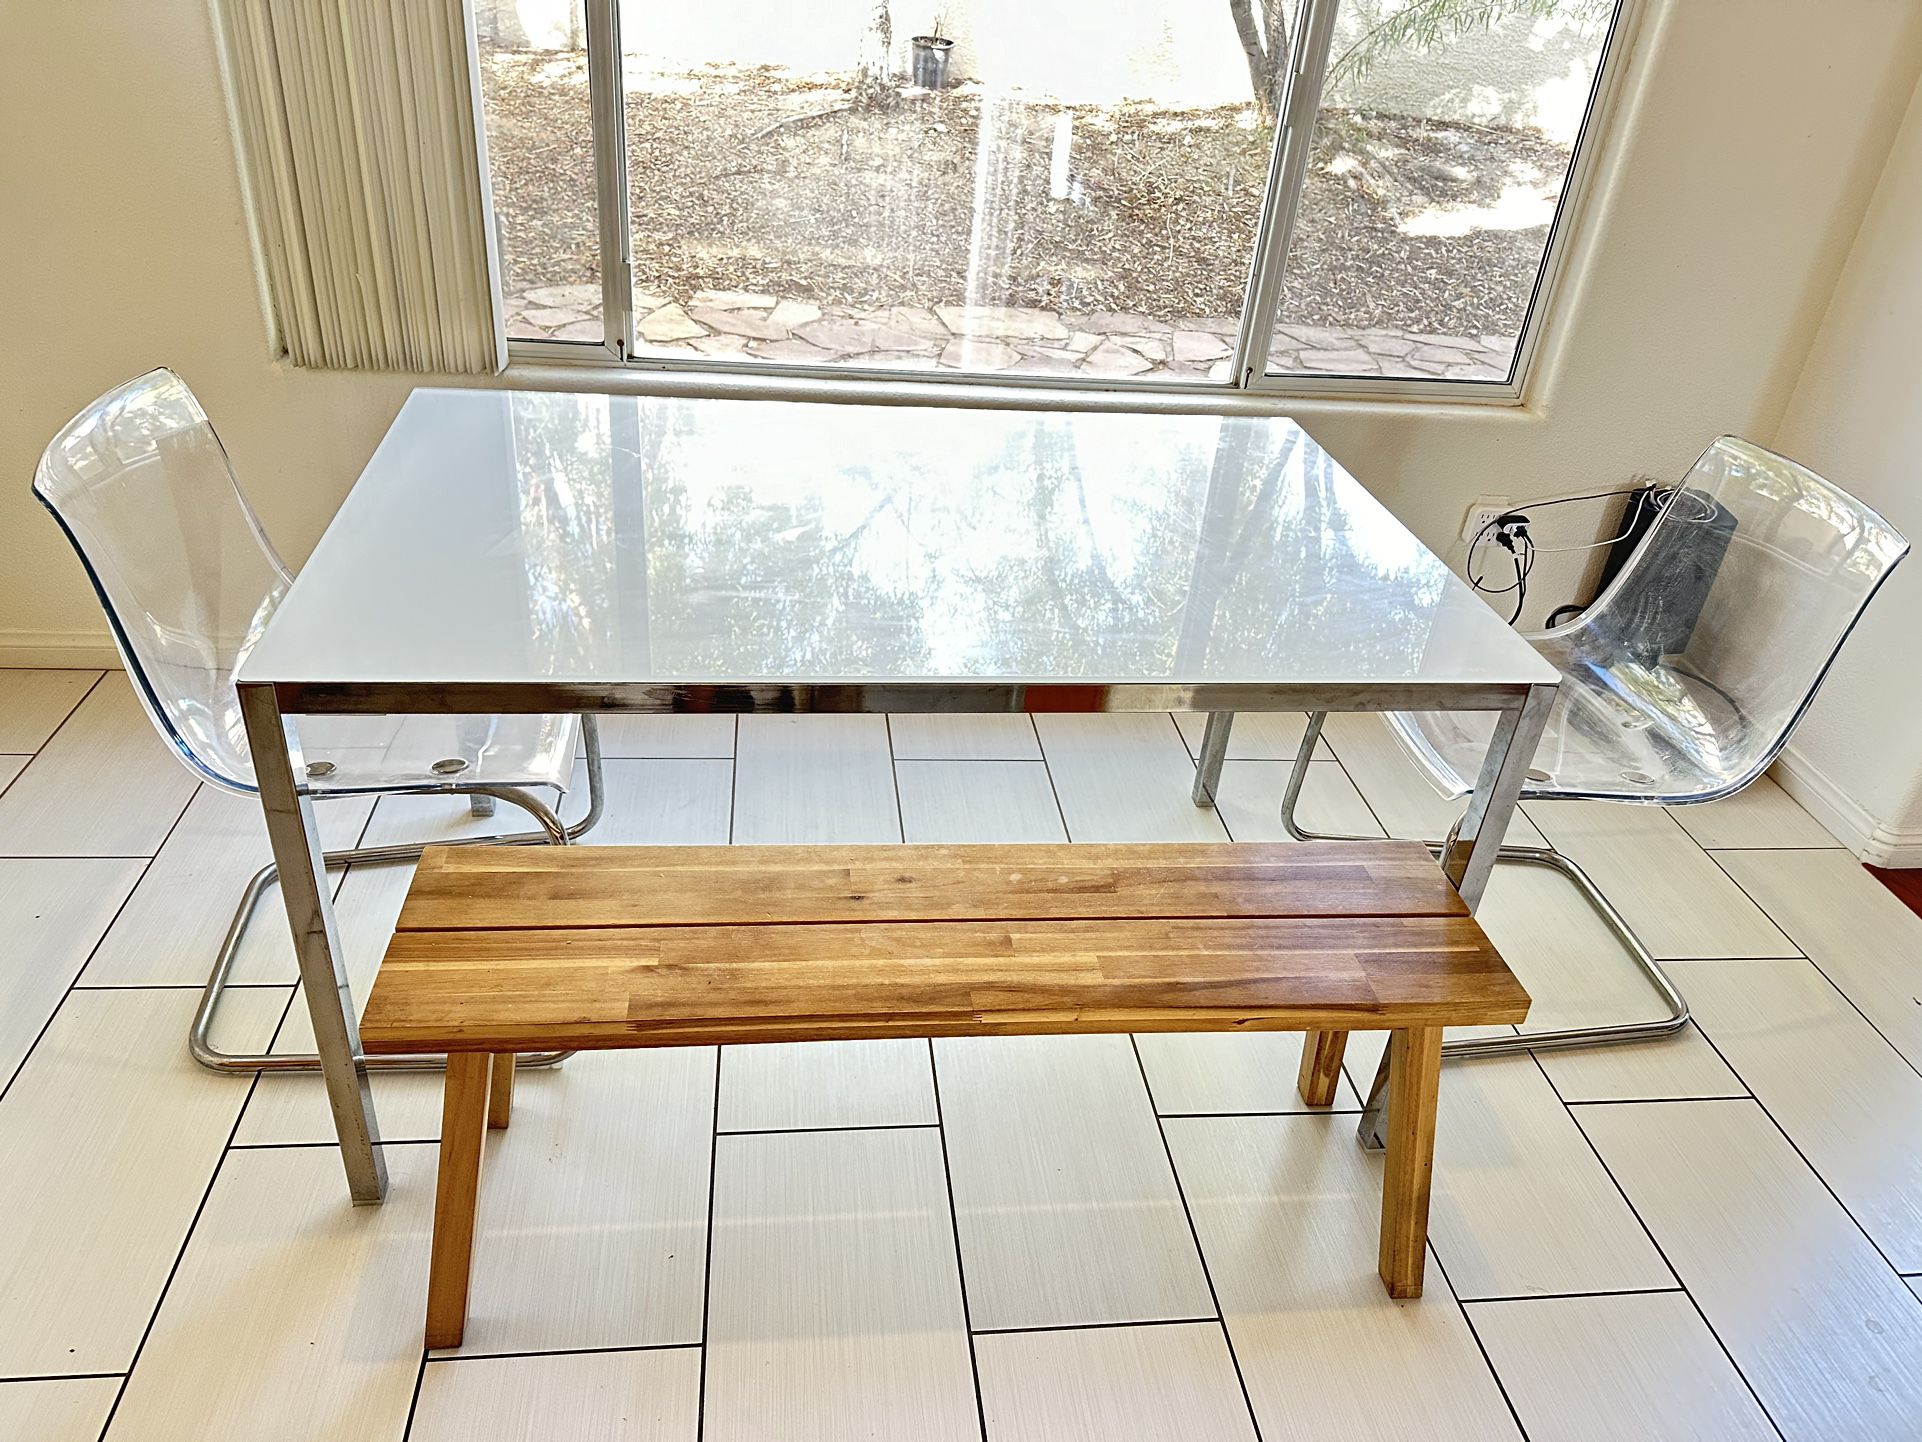 Must Sell SALE! 1/2 OFF Gorgeous Contemporary Glass Dining Table Set